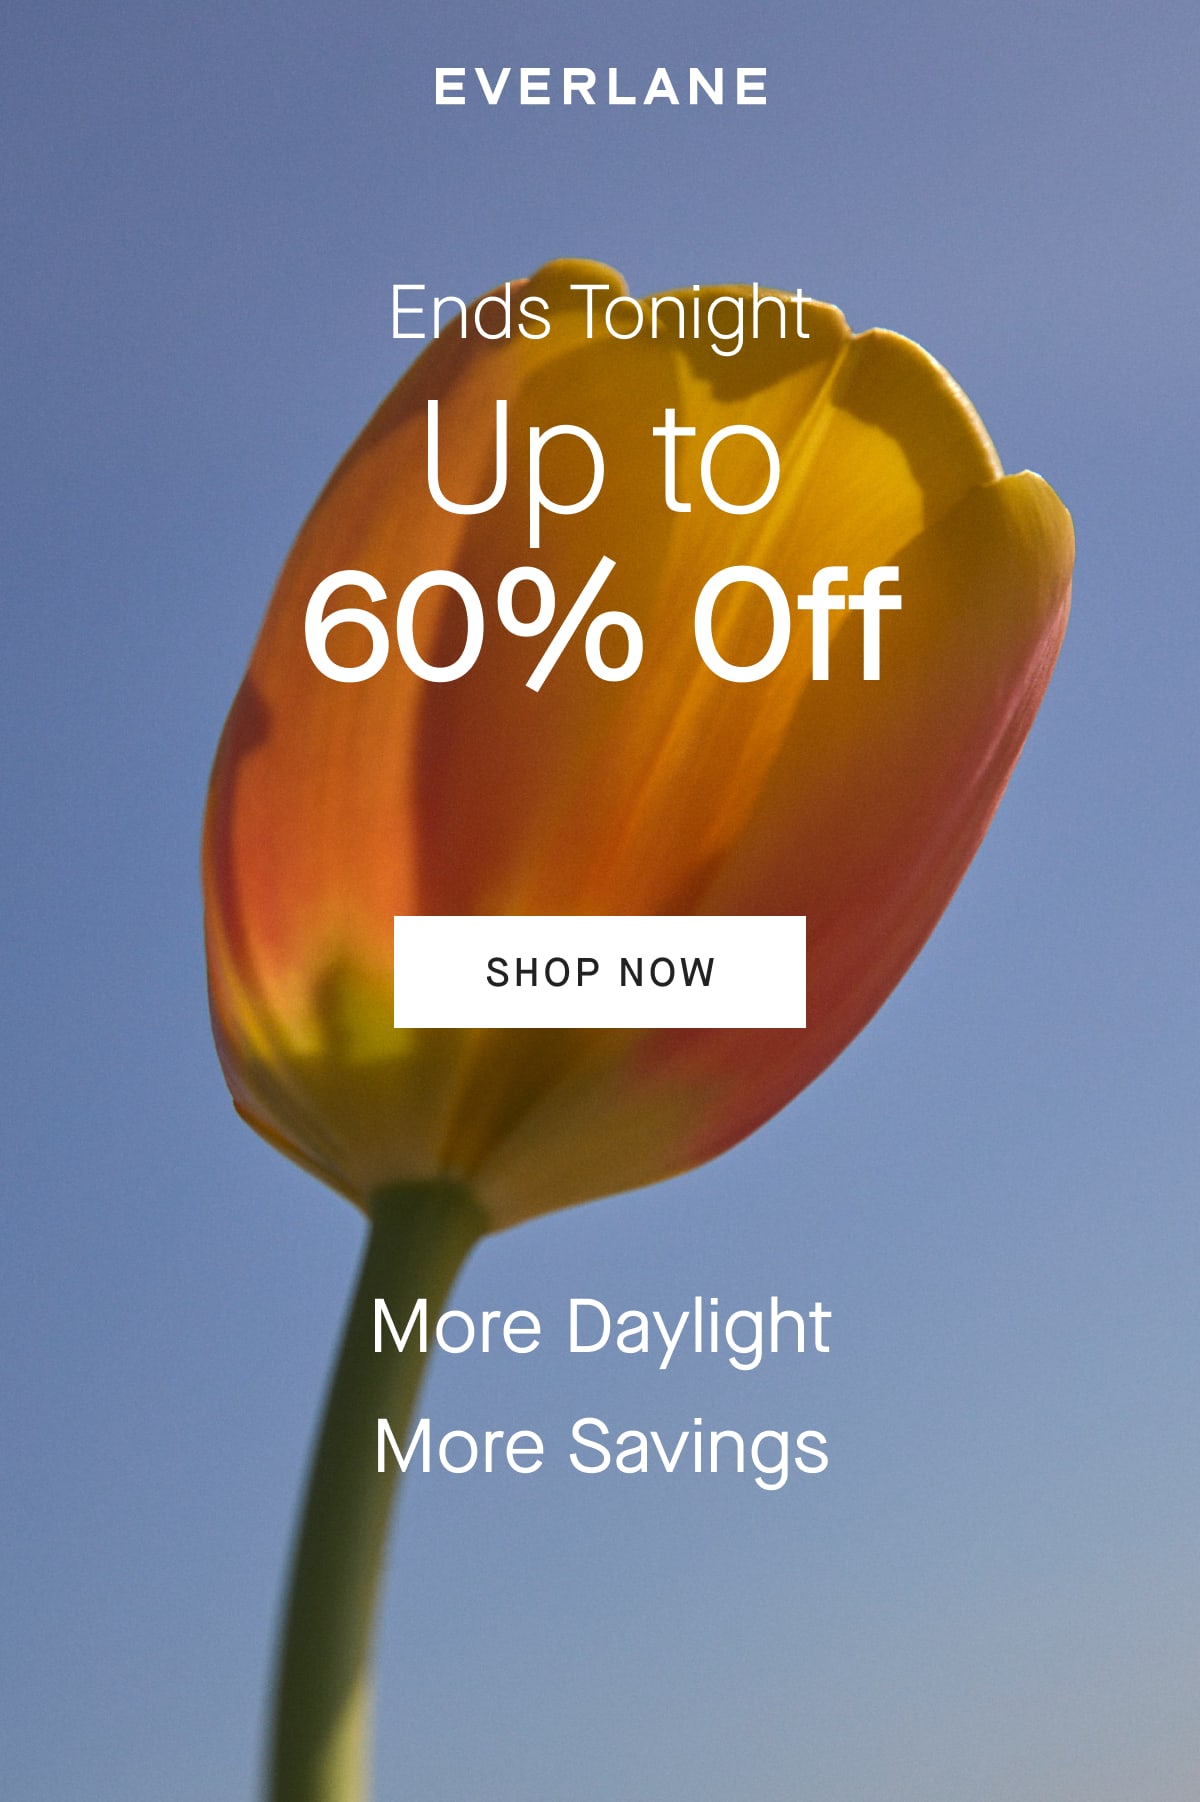 [EVERLANE][IMAGE] Up to 60% Off [SHOP NOW] More Daylight More Savings